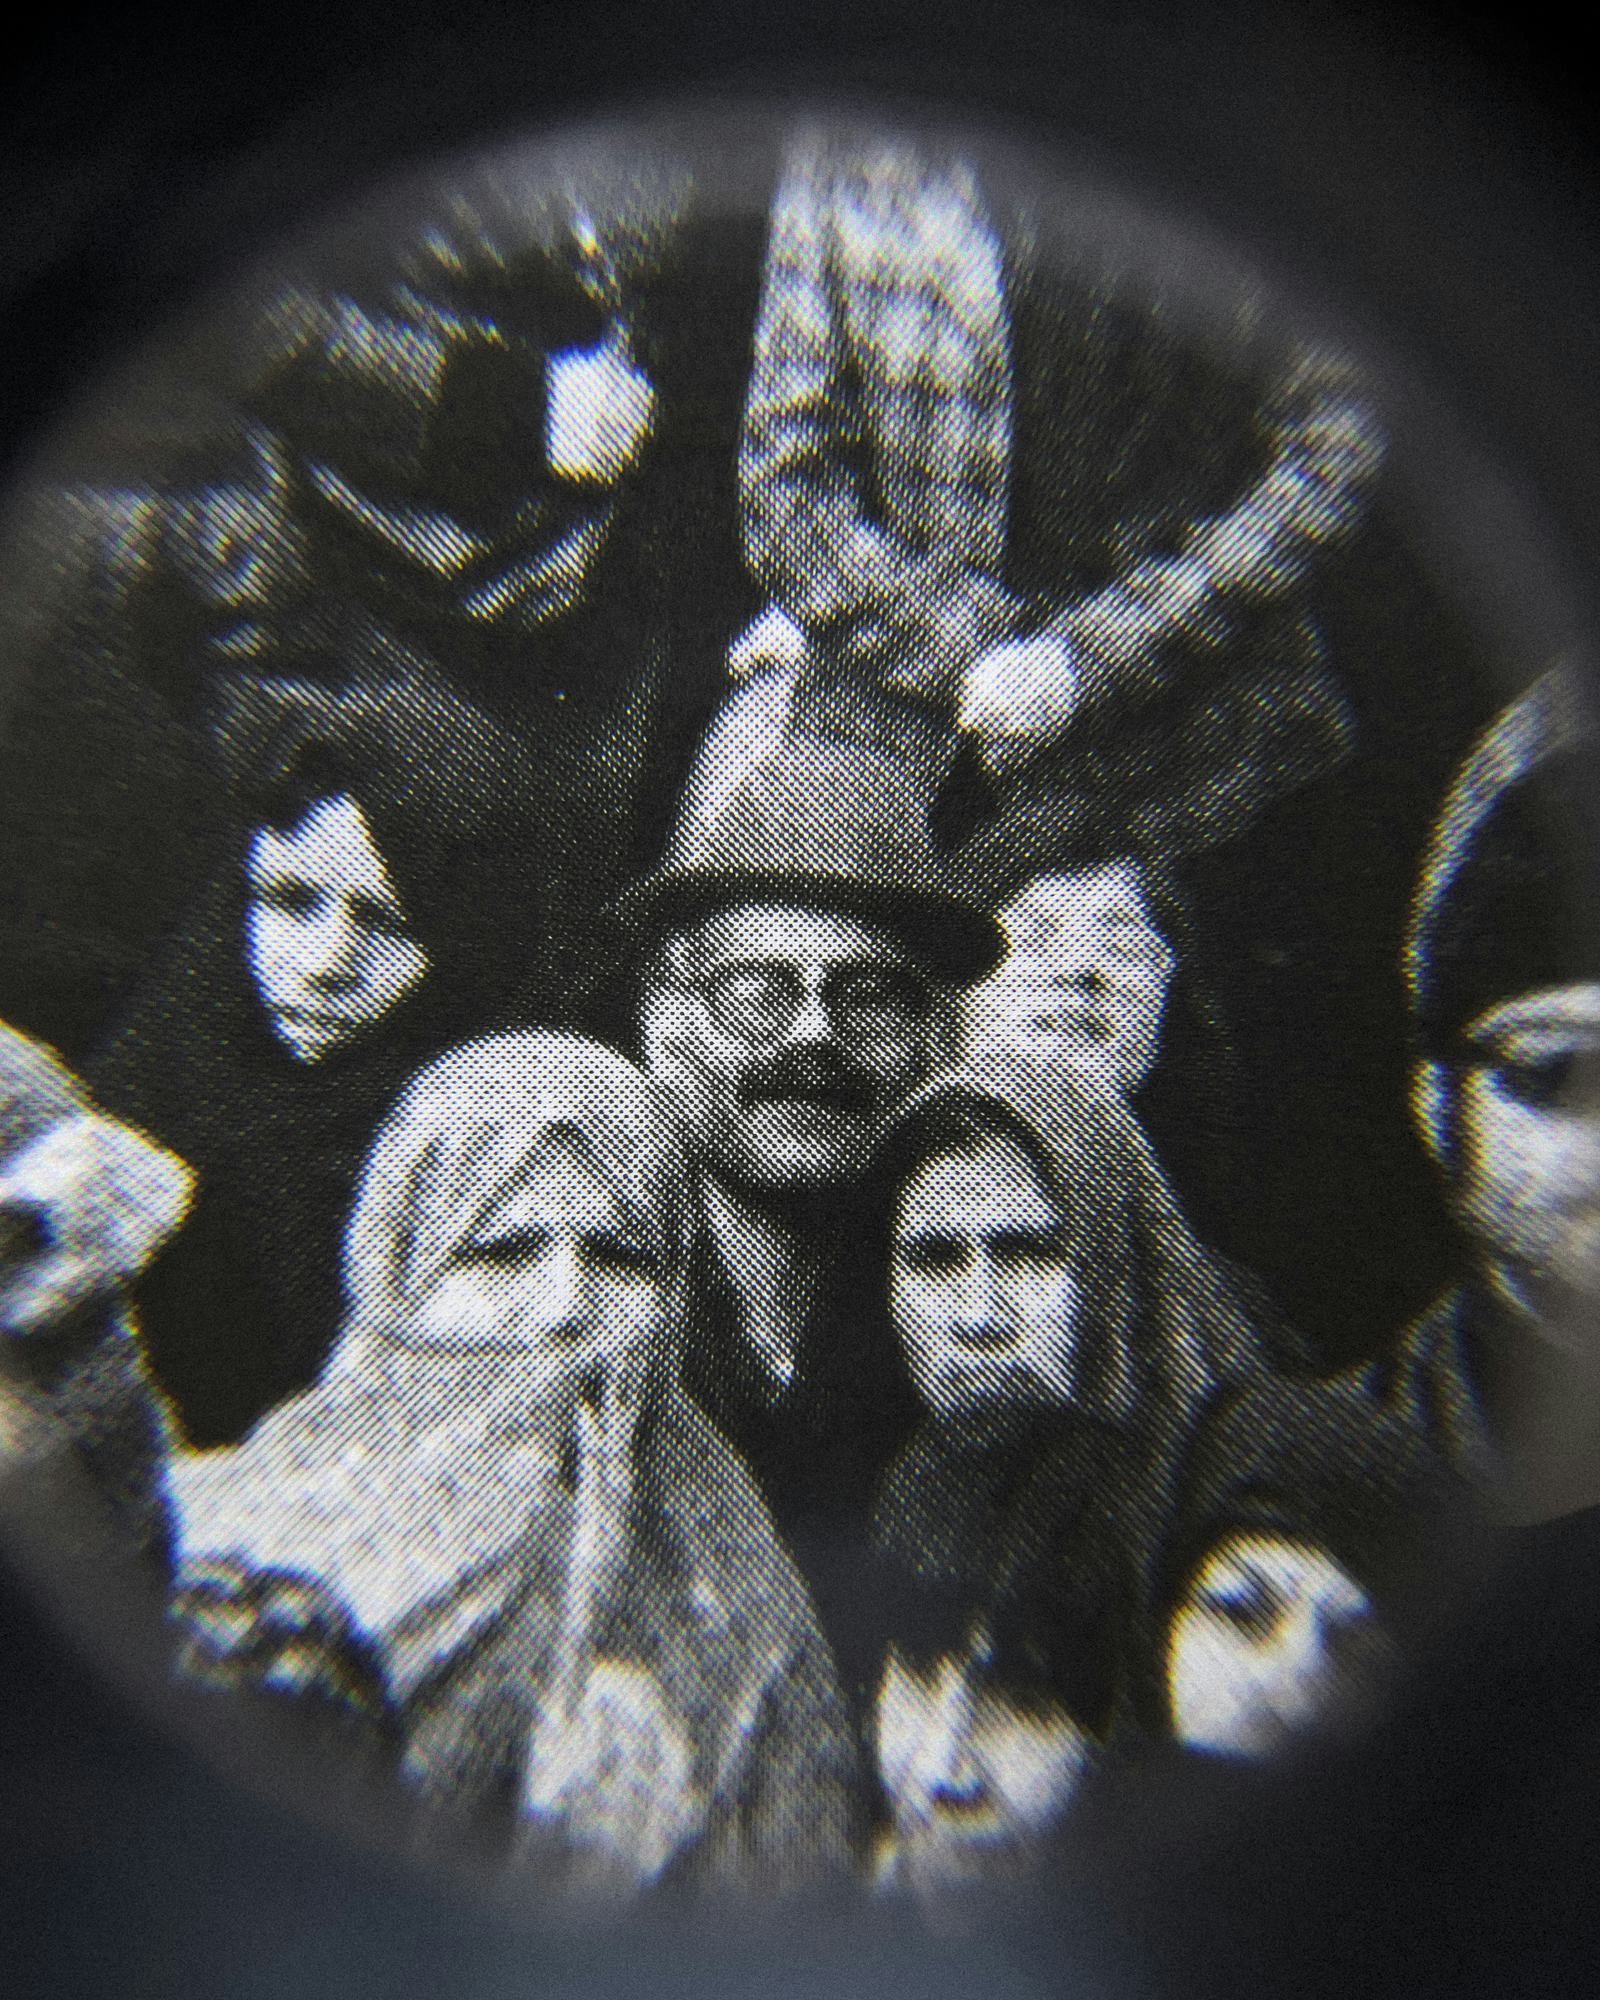 Black and white close-up image of an existing photograph, showing several people in a crowd staring into the camera. Shot through a magnifying lens © Amin Yousefi© Amin Yousefi